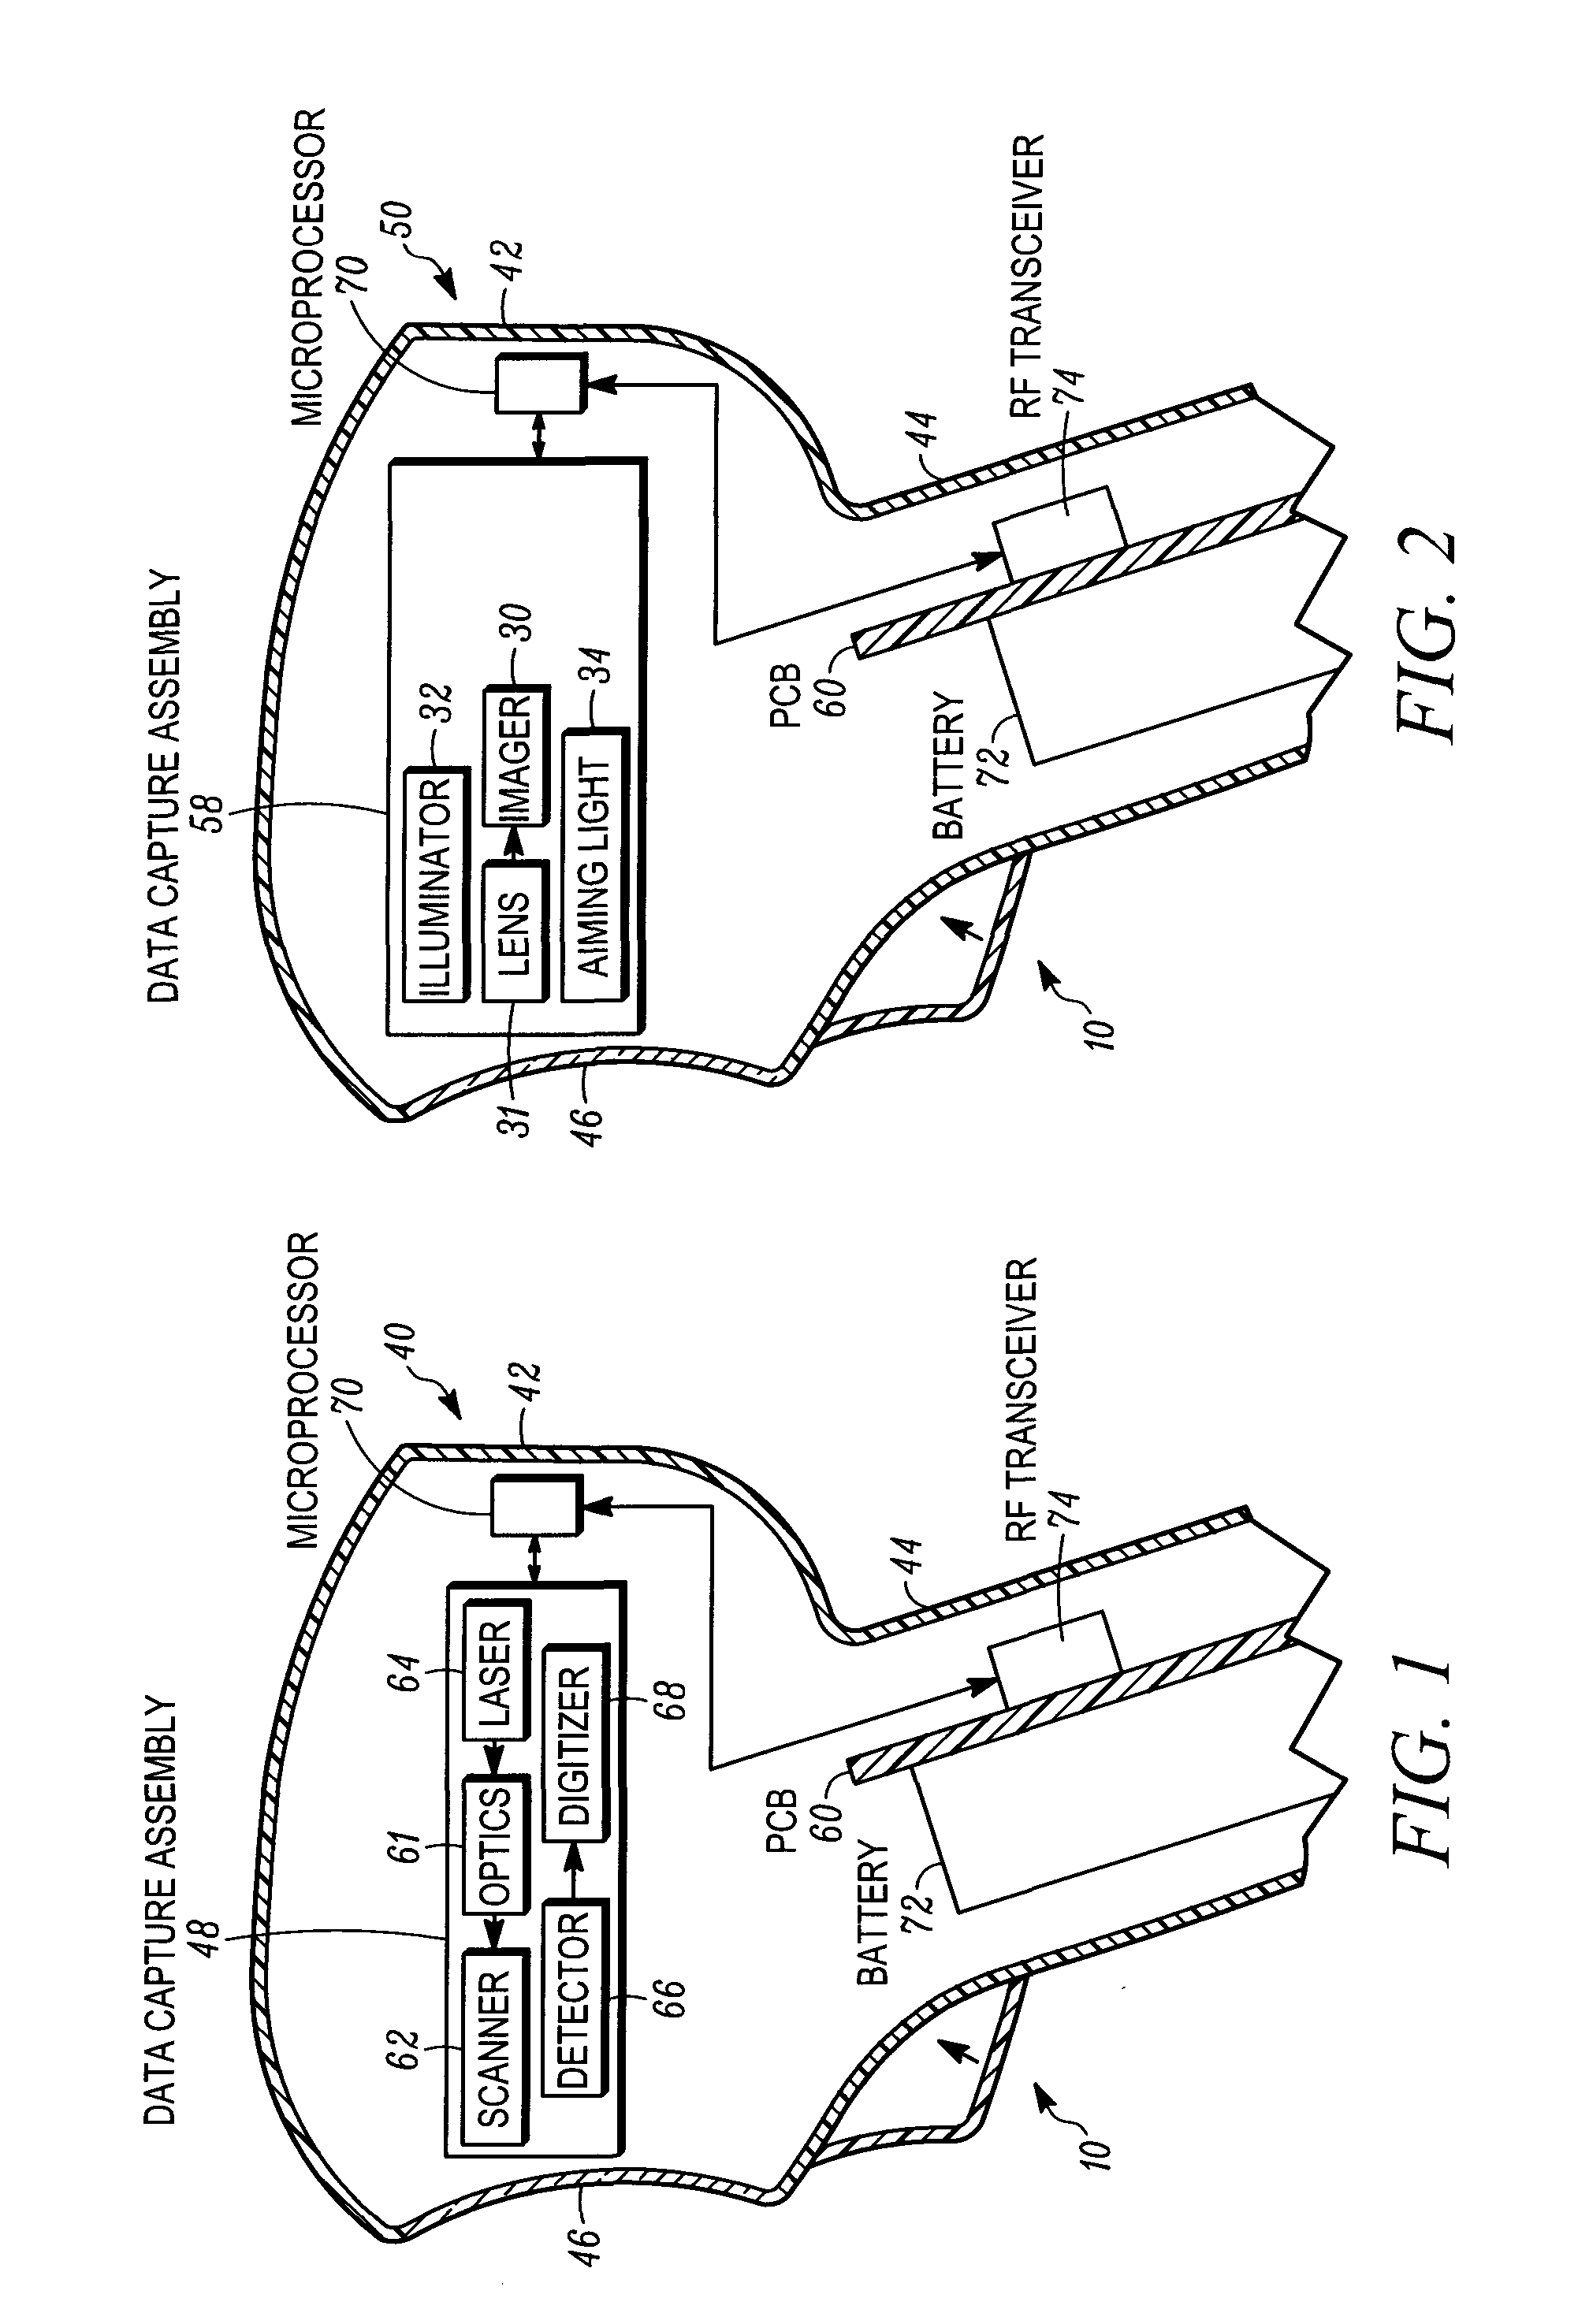 Docking station with extended USB interface for wireless electro-optical reader